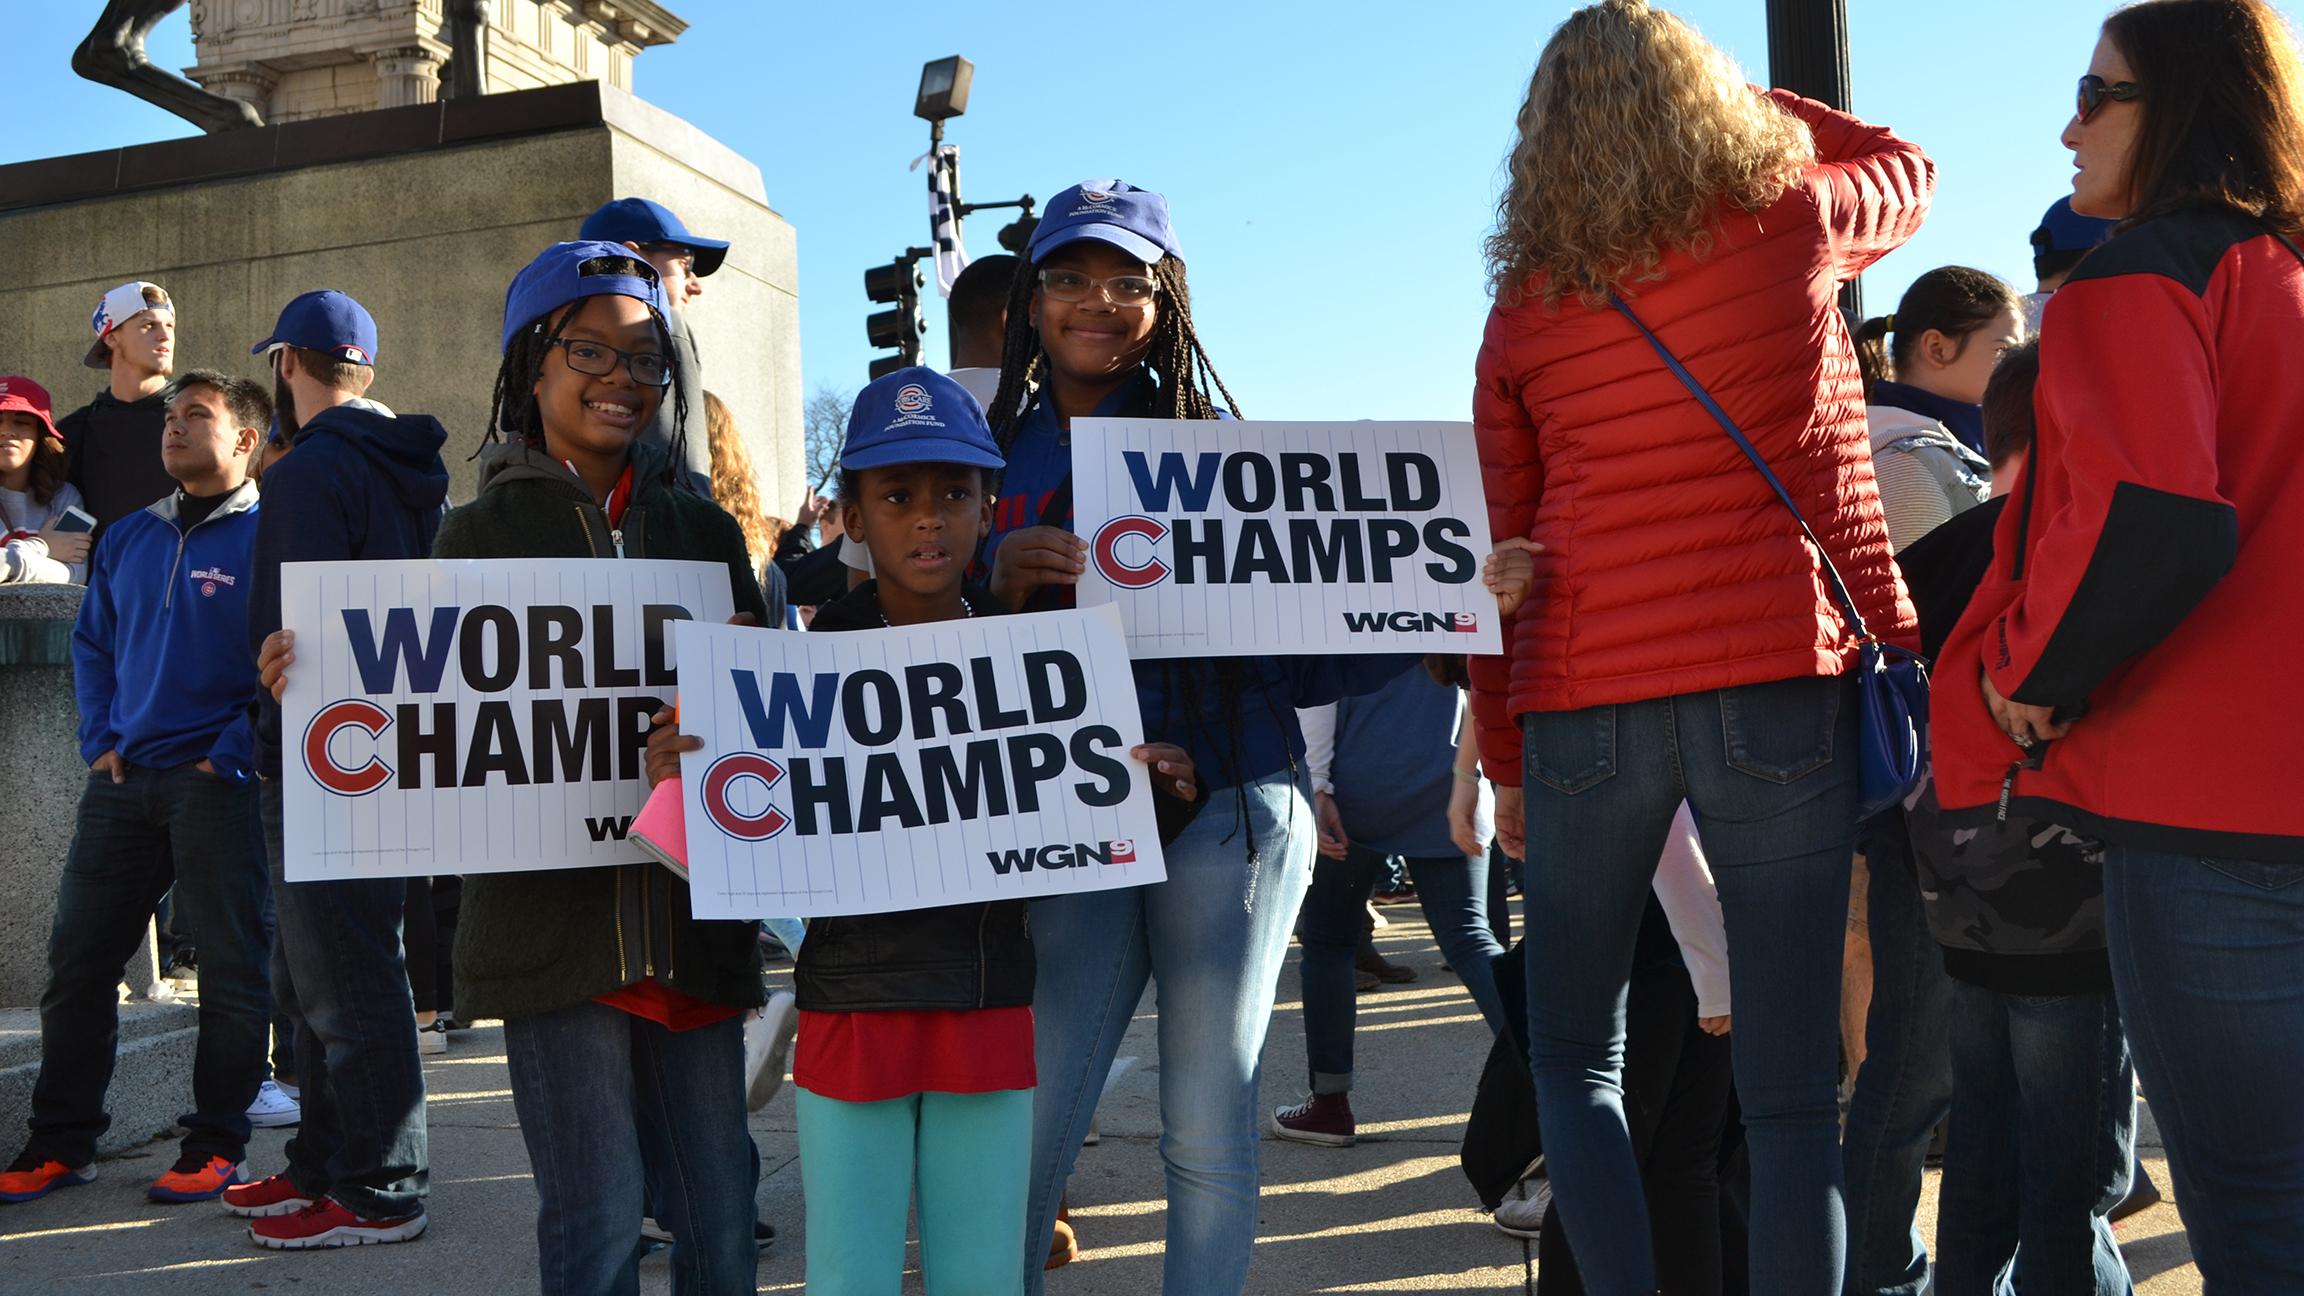 Rogers Park sisters Naysa, Yasmyn and Maya are probably a lot more confident than their parents that the Cubs will return to the World Series in their lifetimes. (Erica Gunderson / Chicago Tonight)